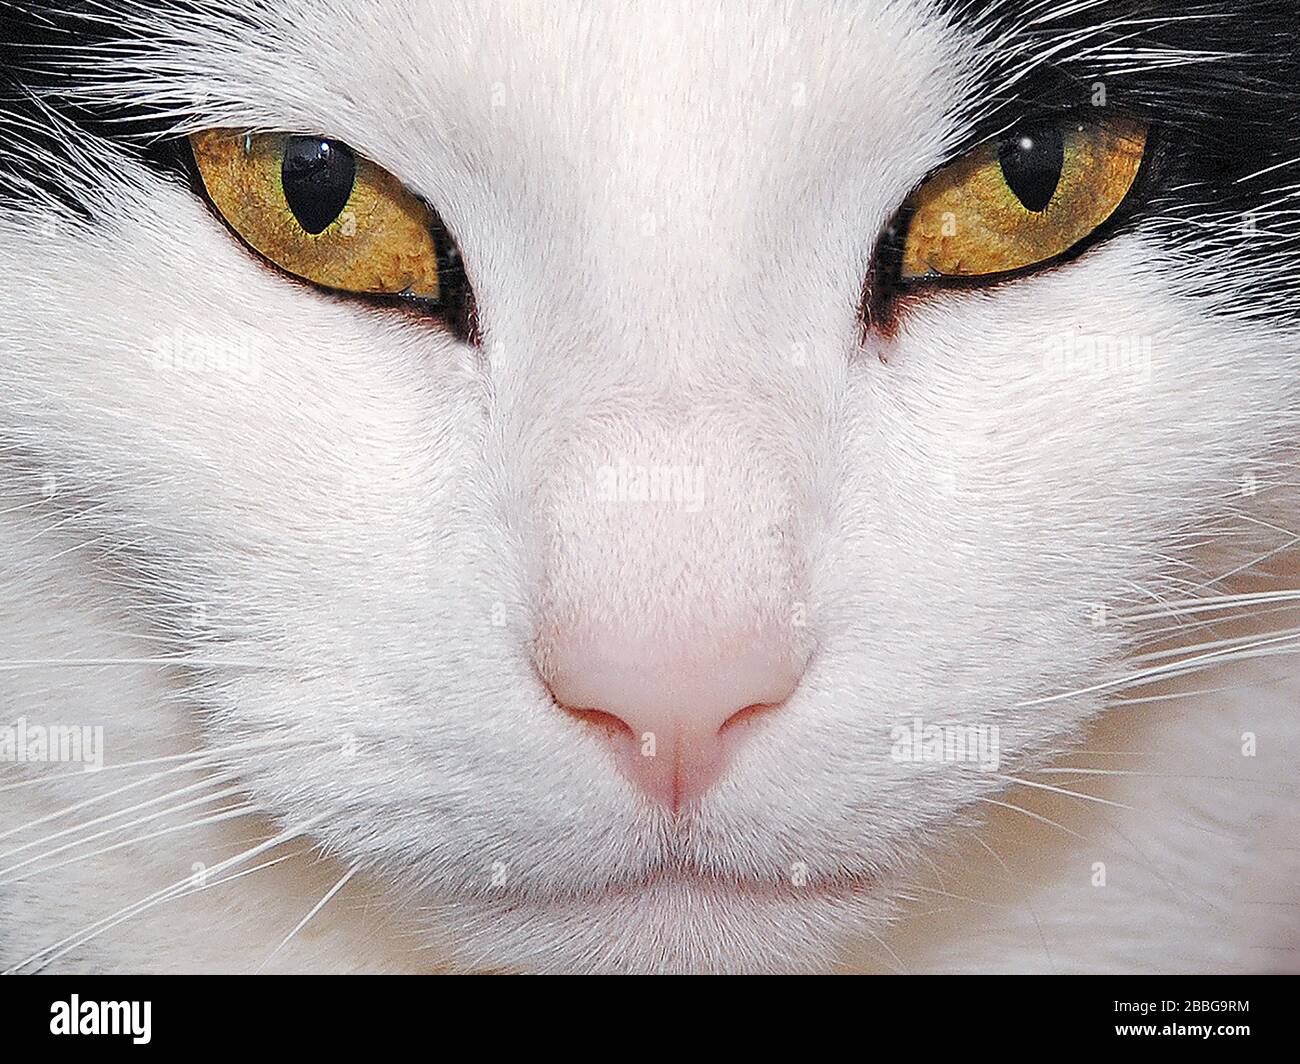 White cat's face full on staring eyes, very sharp with clean fur. Stock Photo